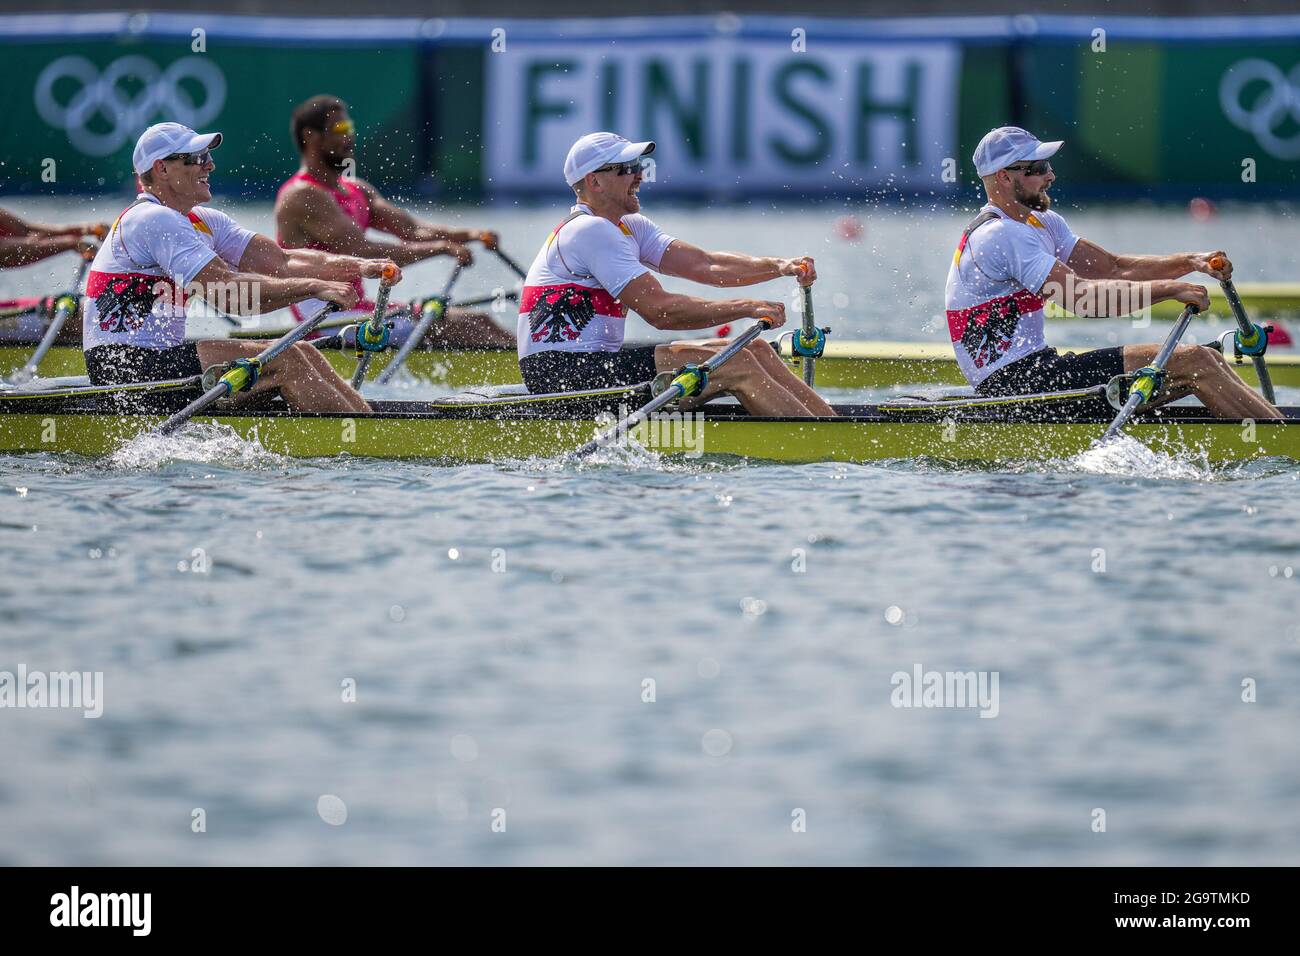 TOKYO, JAPAN - JULY 28: Tim Ole Naske, Karl Schulze, Hans Gruhne and Max Appel of Germany competing on Men's Quadruple Sculls Final B during the Tokyo 2020 Olympic Games at the Sea Forest Waterway on July 28, 2021 in Tokyo, Japan (Photo by Yannick Verhoeven/Orange Pictures) Stock Photo